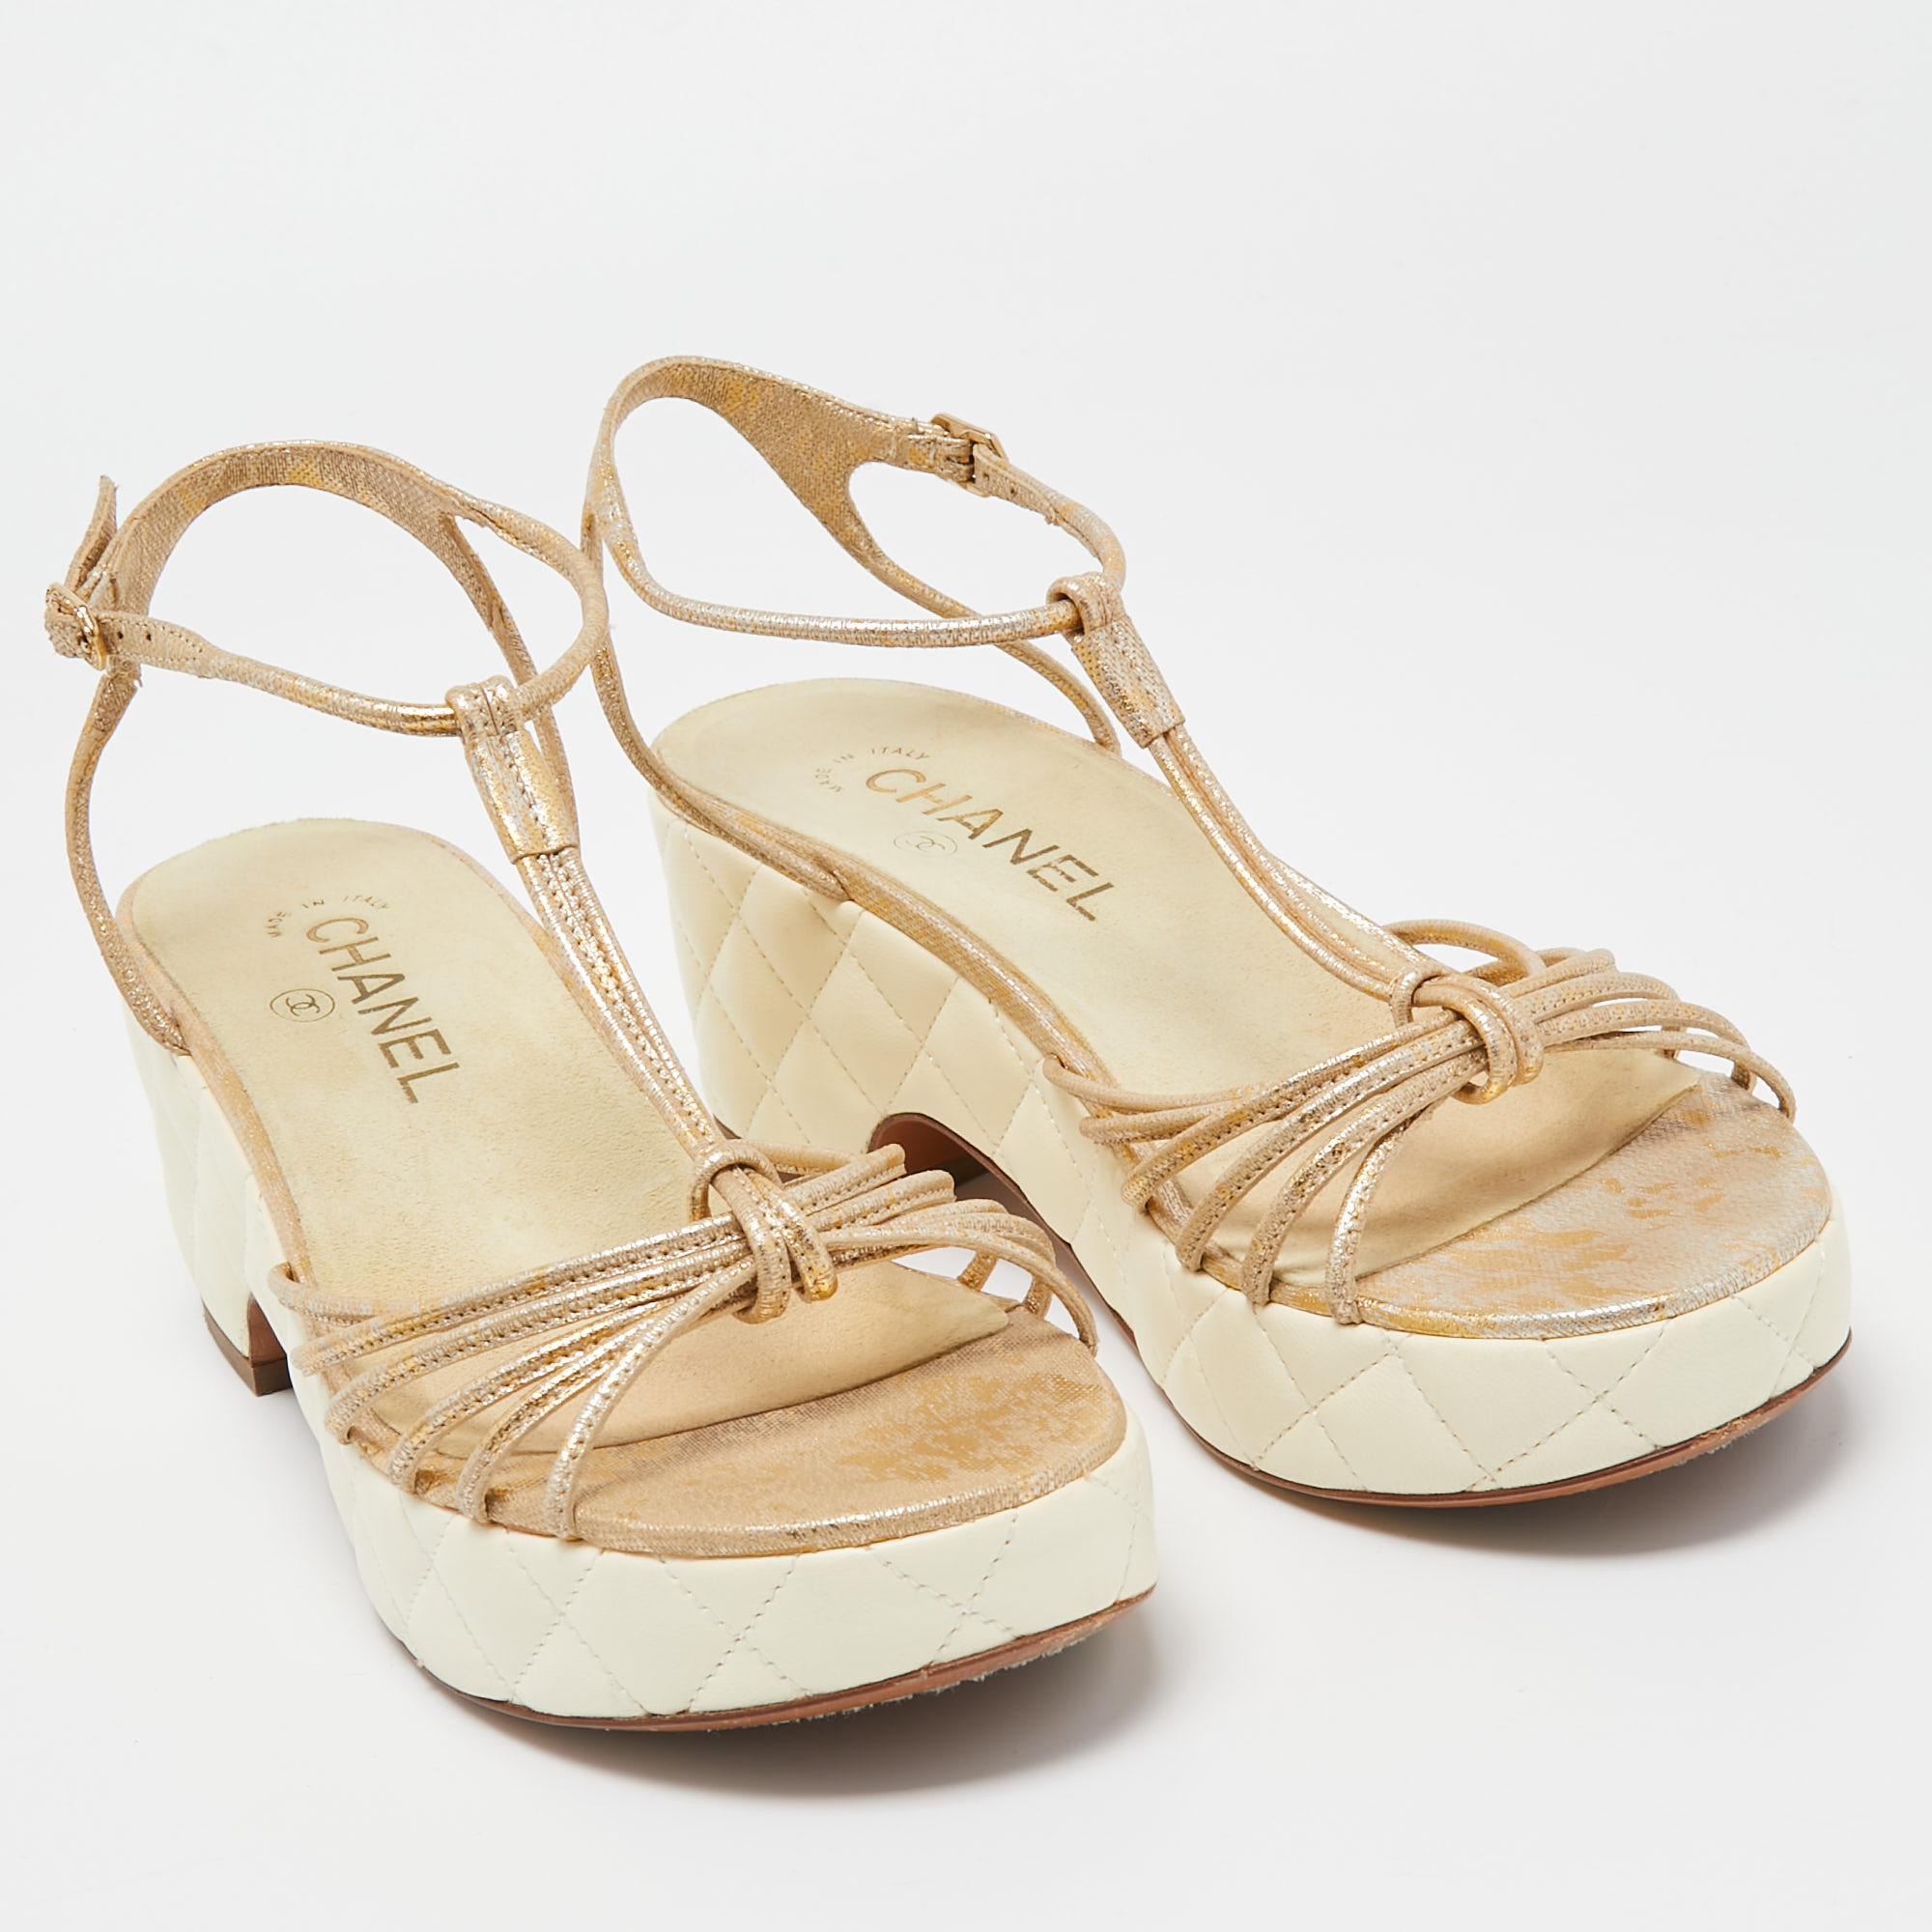 Chanel Cream Leather CC Wedge Sandals Size 37.5